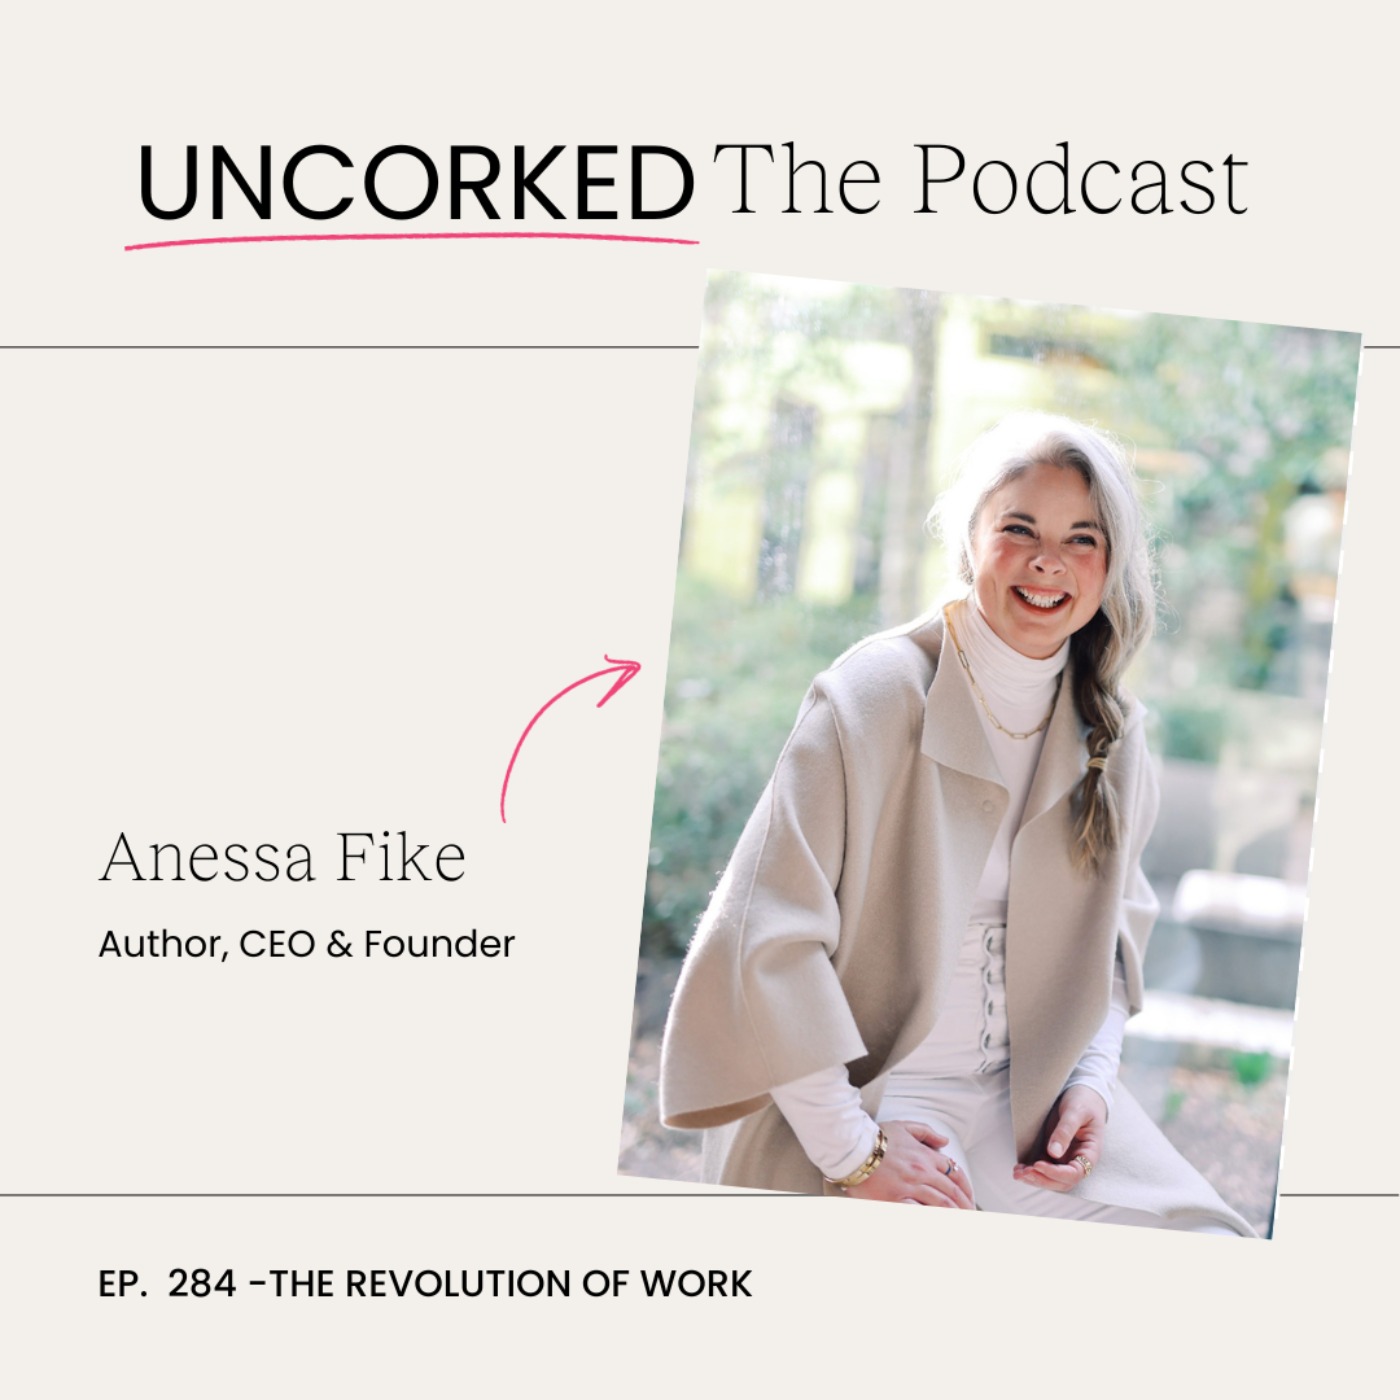 The Revolution of Work with Anessa Fike